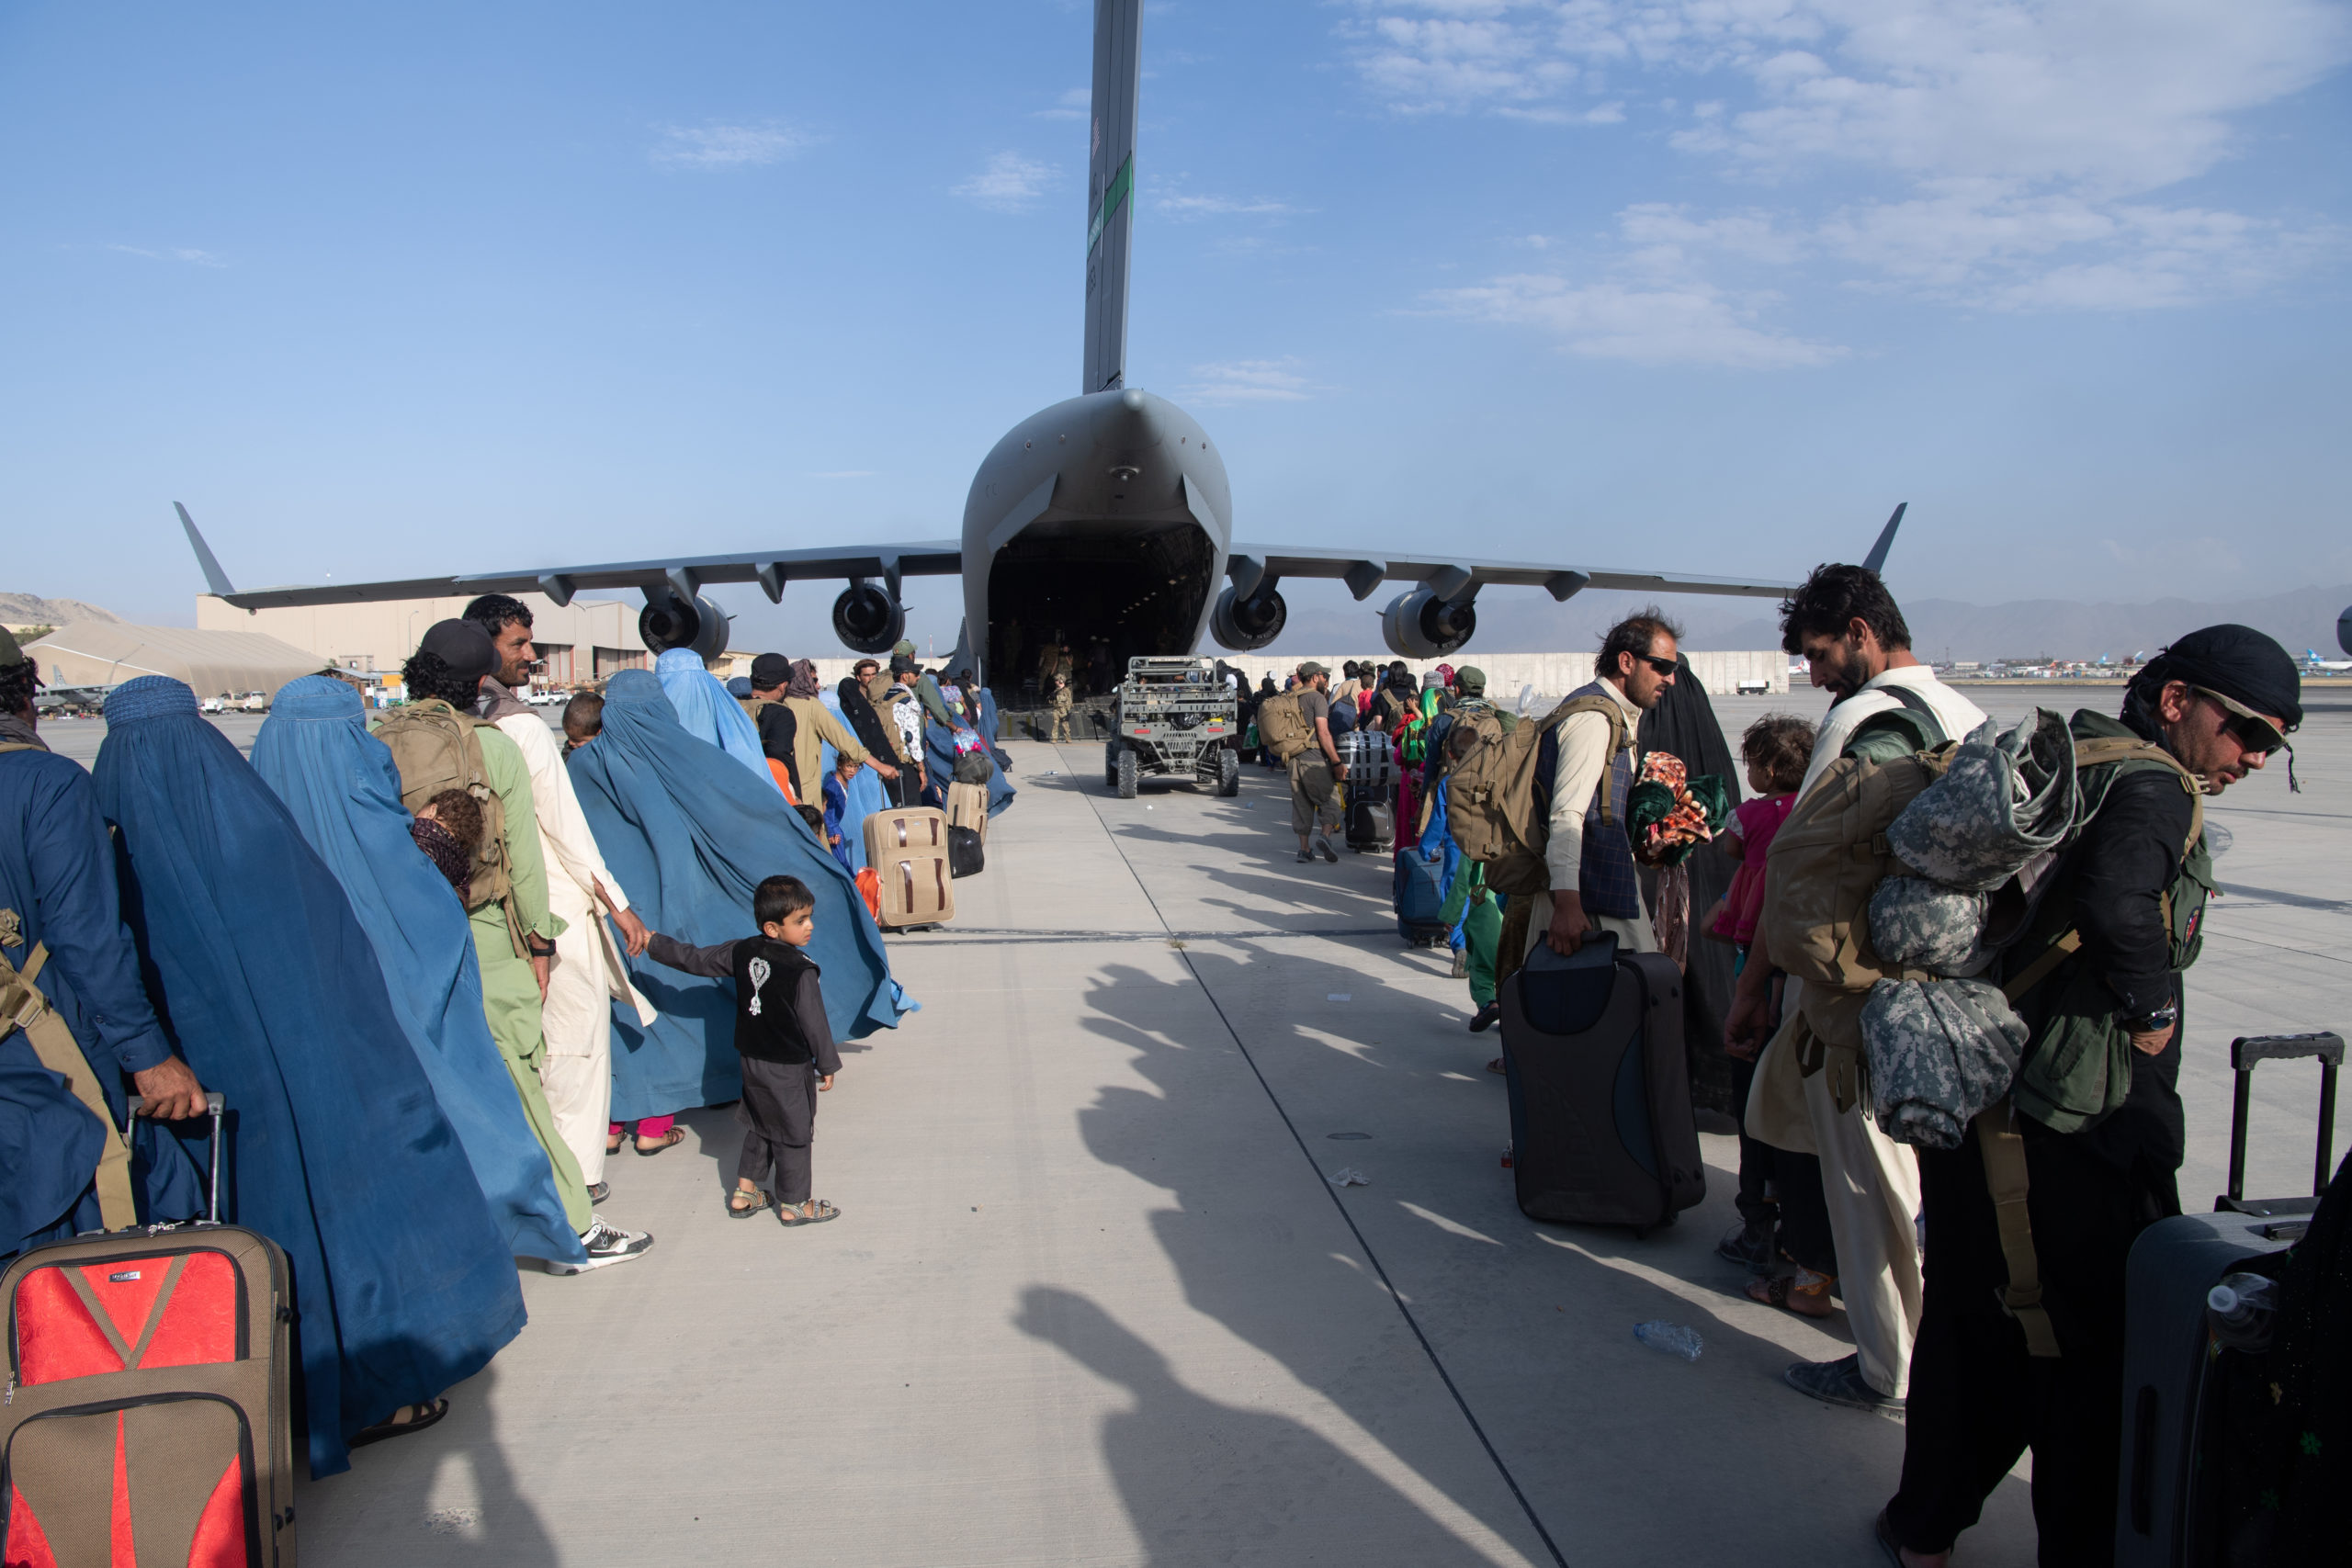 KABUL, AFGHANISTAN - AUGUST 24: In this handout provided by U.S. Central Command Public Affairs, U.S. Air Force loadmasters and pilots assigned to the 816th Expeditionary Airlift Squadron, load passengers aboard a U.S. Air Force C-17 Globemaster III in support of the Afghanistan evacuation at Hamid Karzai International Airport (HKIA) on August 24, 2021 in Kabul, Afghanistan. The United States and allies urged Afghans to leave Kabul airport, citing the threat of terrorist attacks, as Western troops race to evacuate as many people as possible by August 31. 